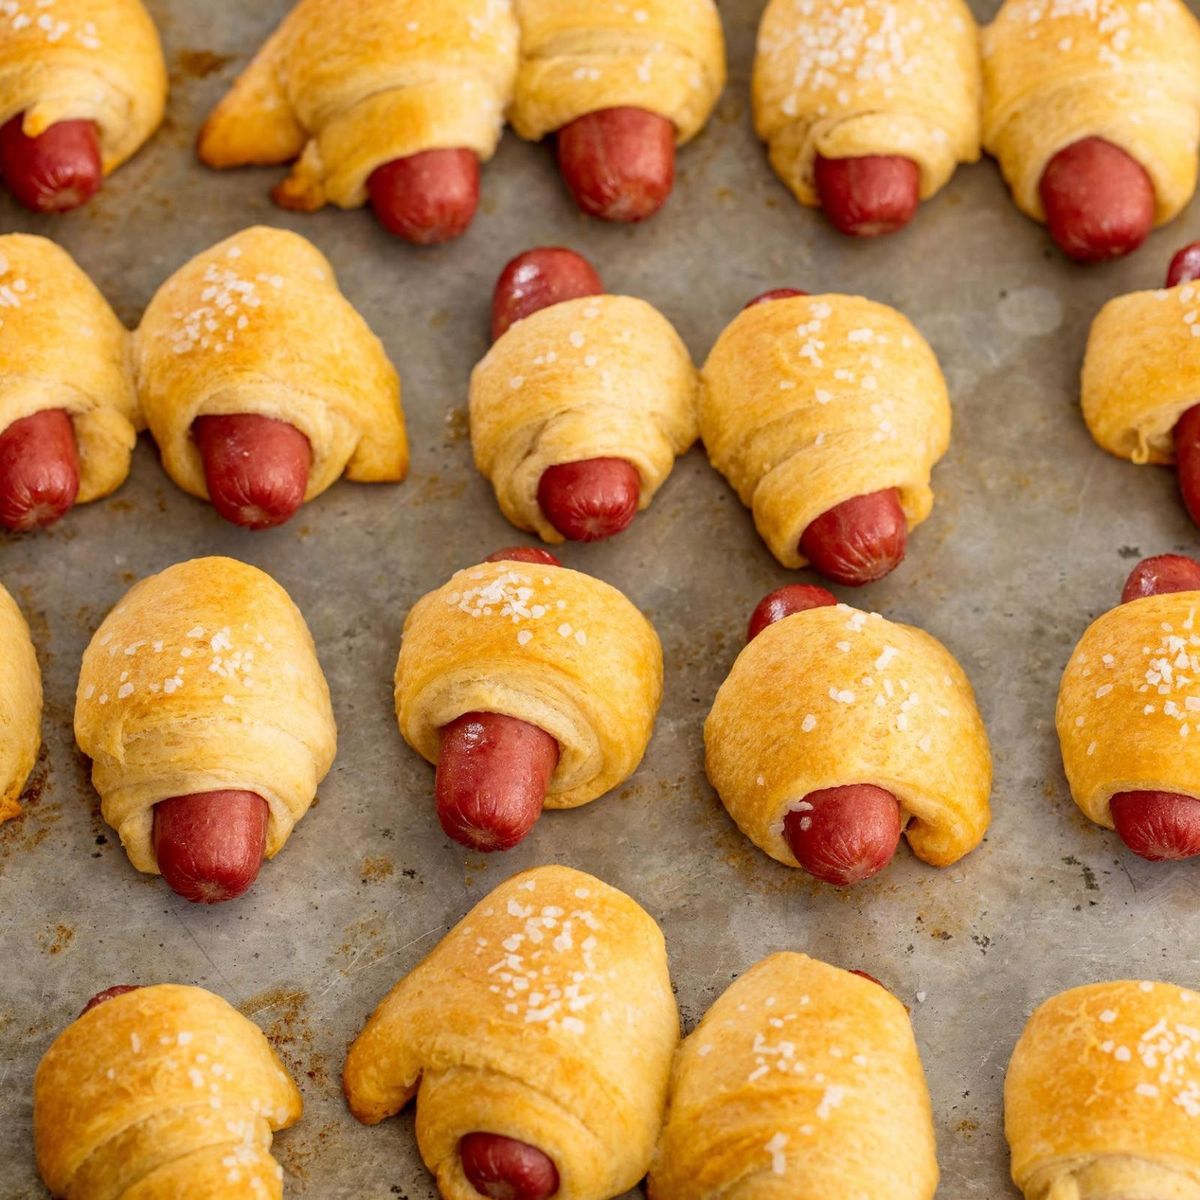 Best Pigs In A Blanket Recipe - How to Make Homemade Pigs In A Blanket